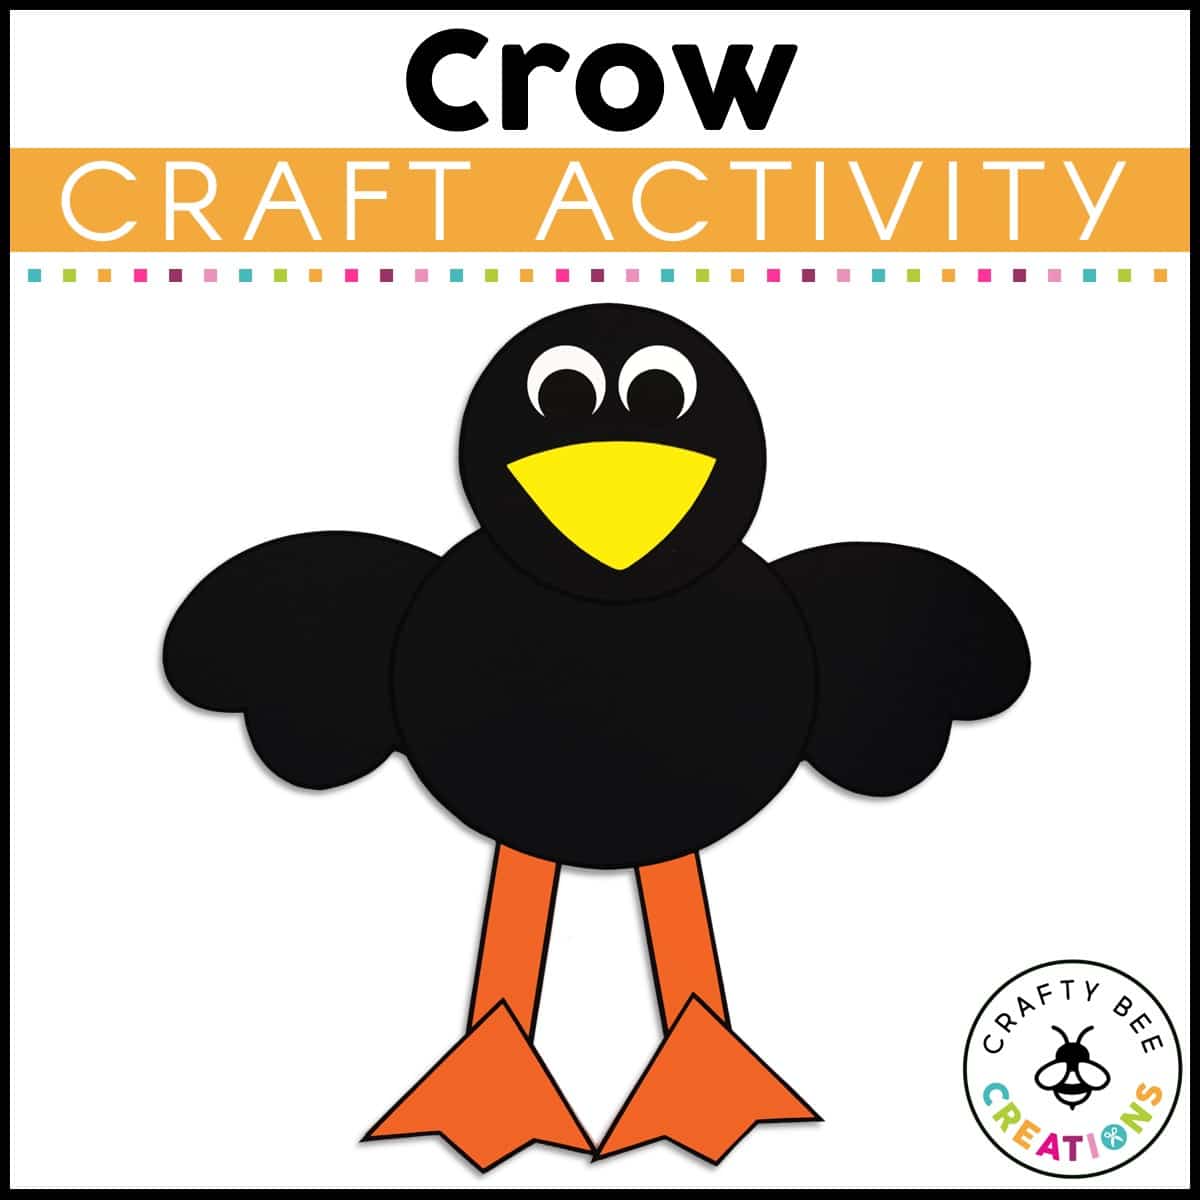 Child's Art Portfolio - Things to Make and Do, Crafts and Activities for  Kids - The Crafty Crow